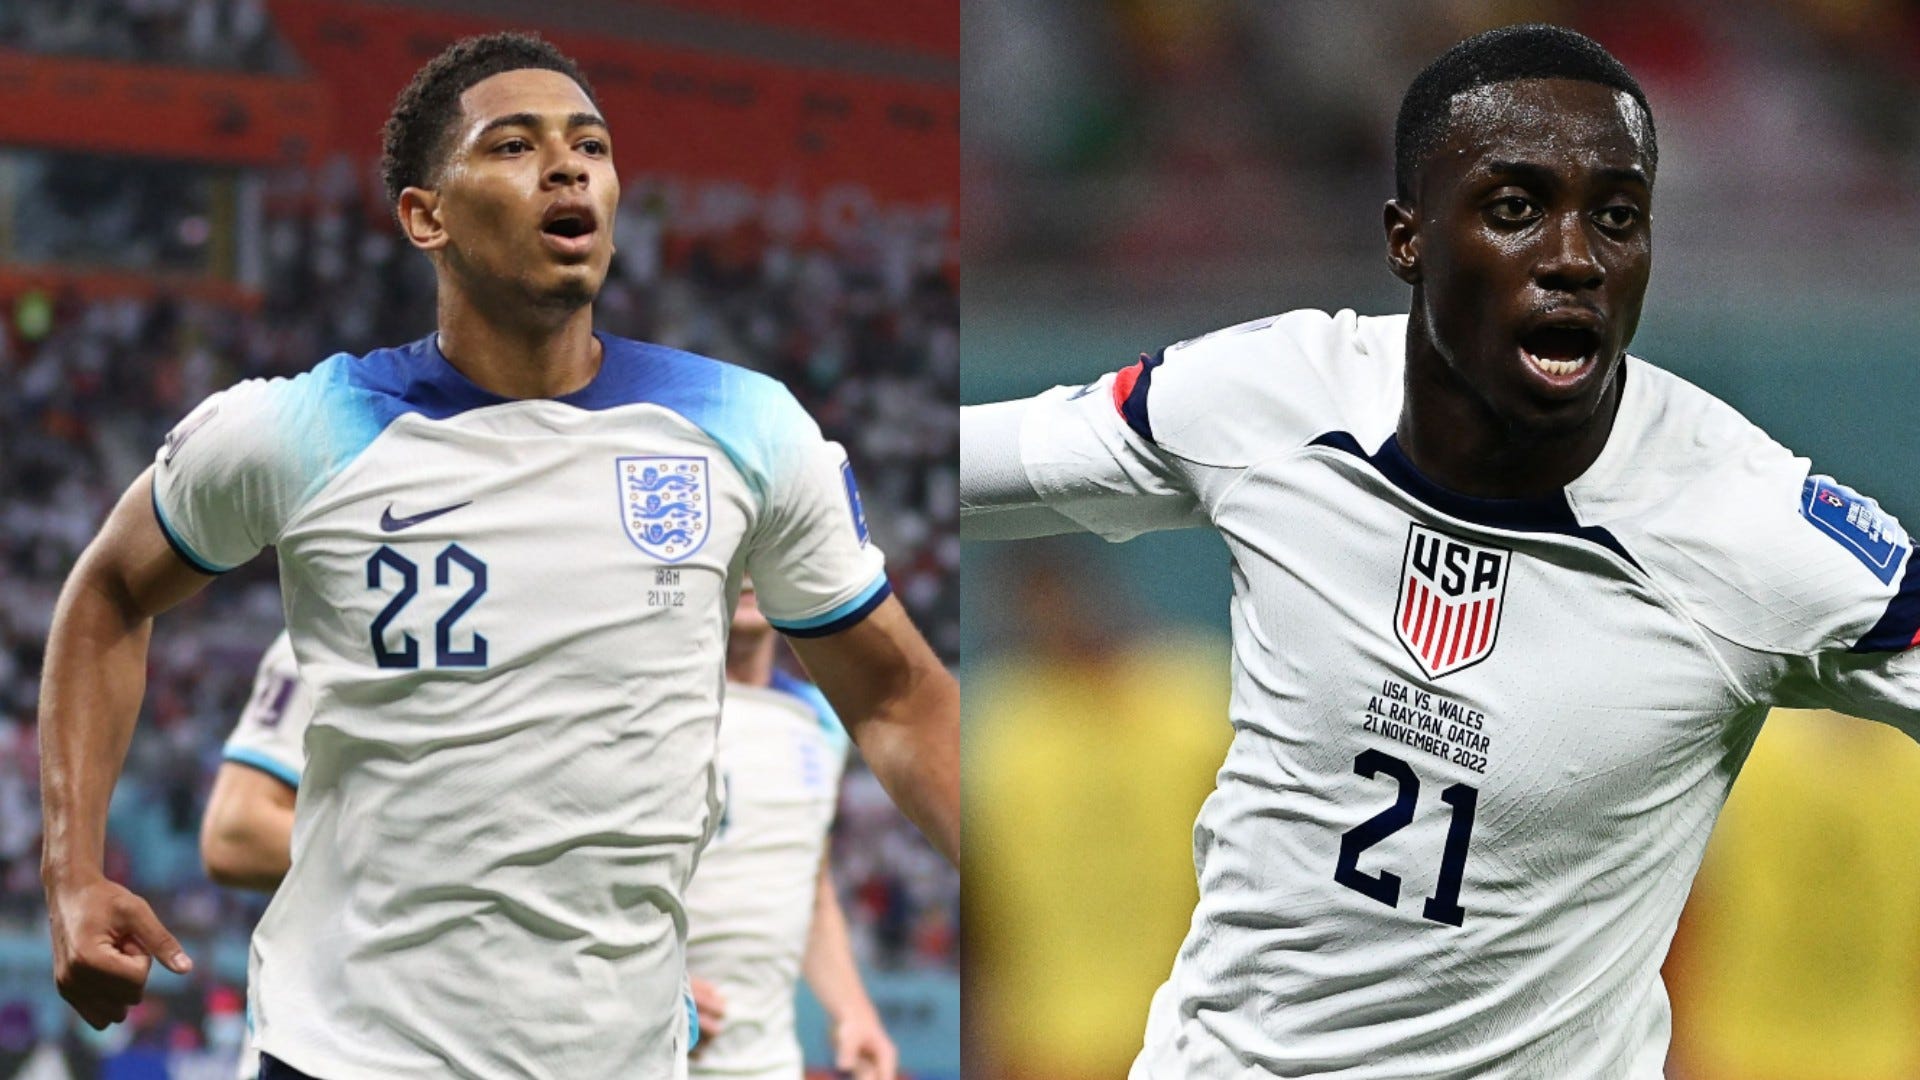 England vs USA Live stream, TV channel, kick-off time and where to watch Goal